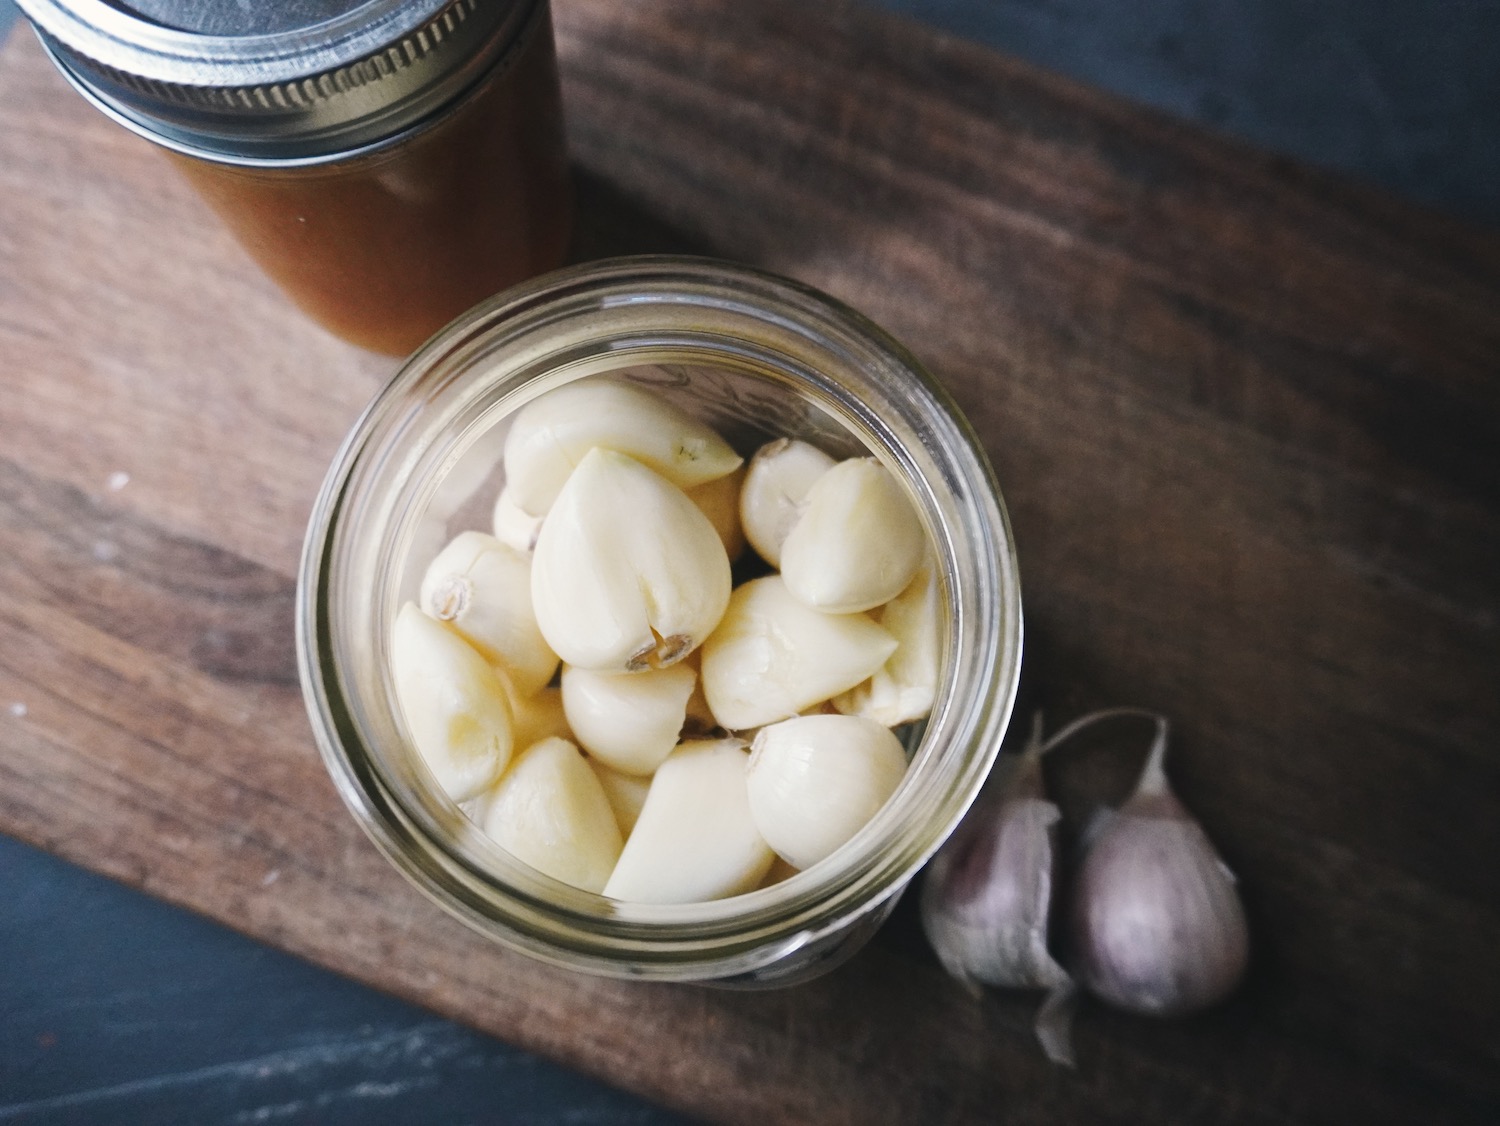 A glass jar filled with peeled garlic cloves sitting on a wooden cutting board